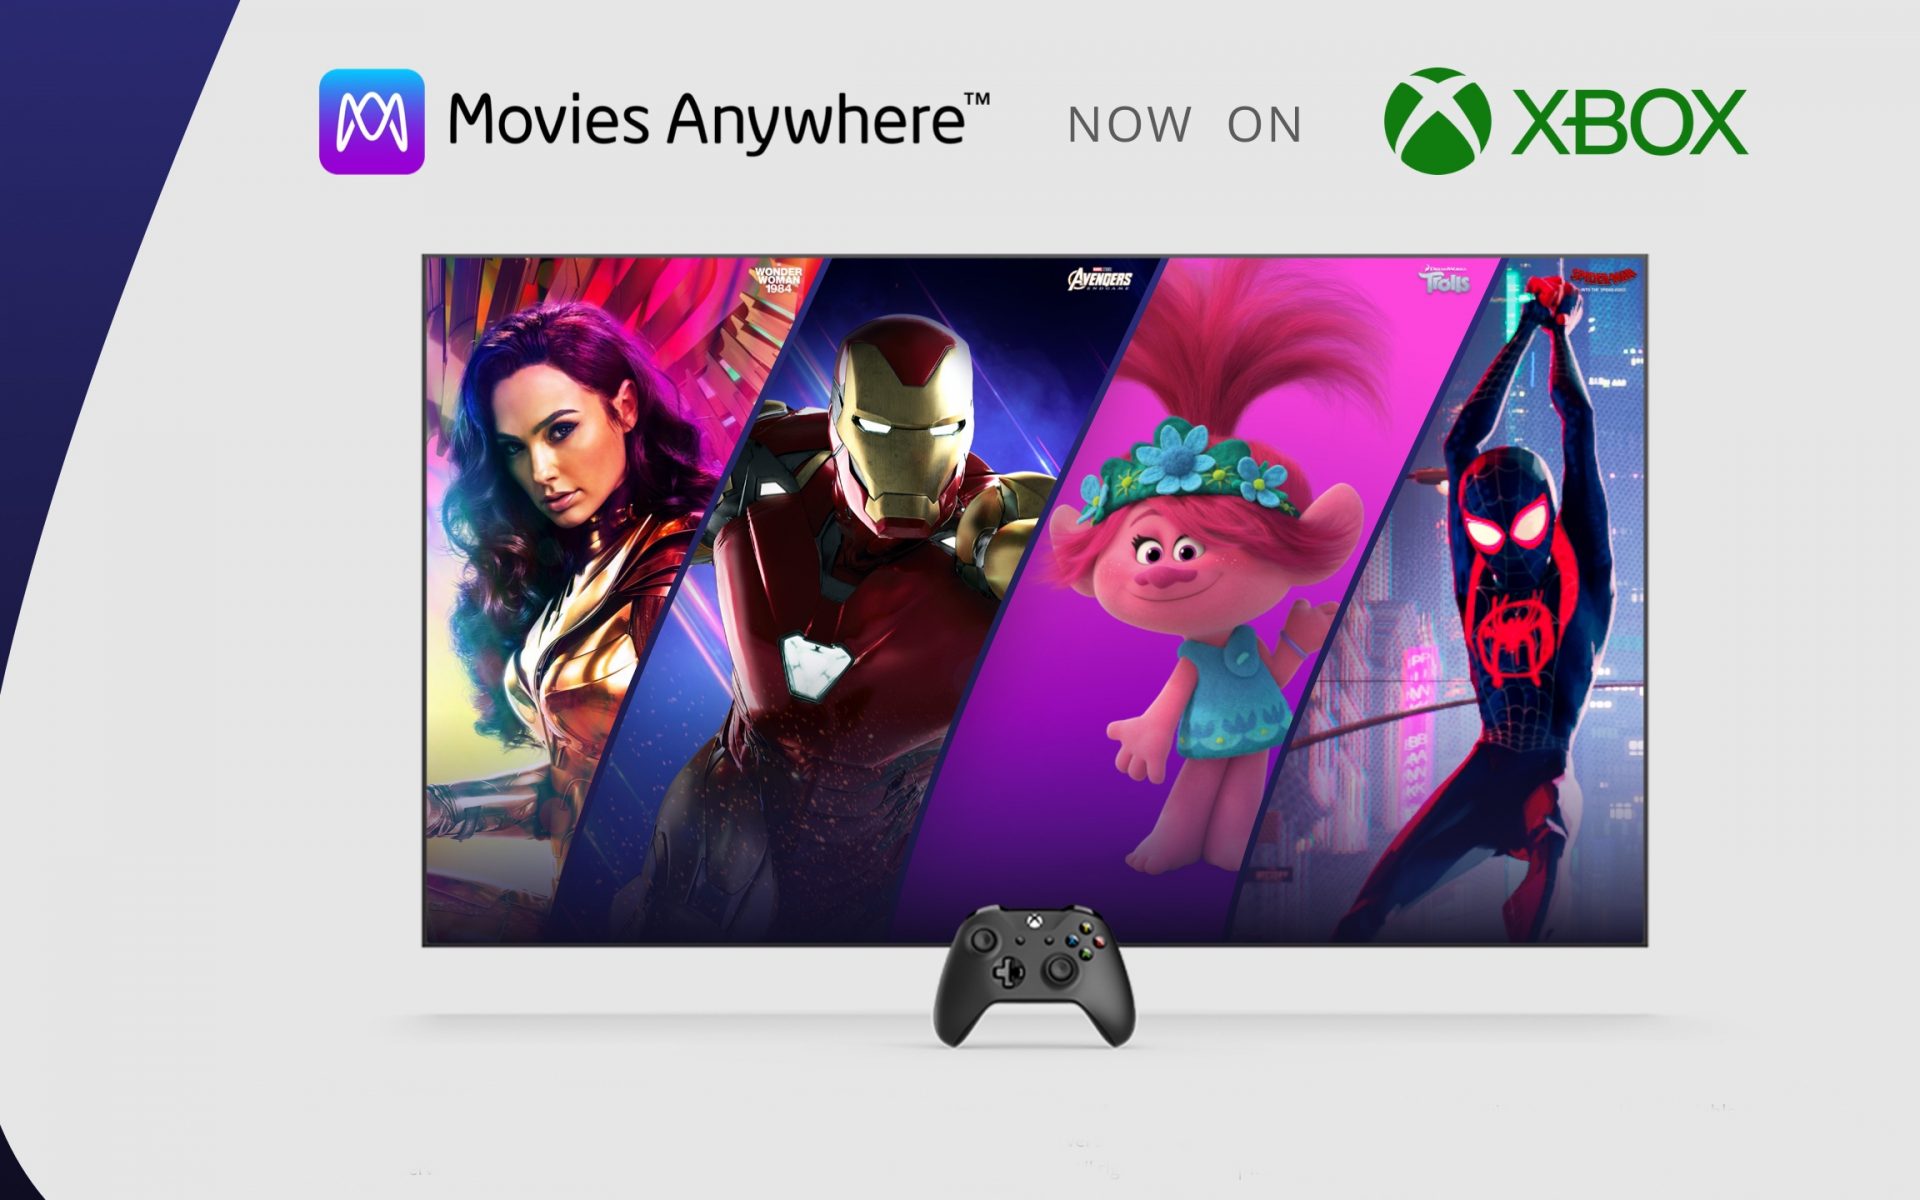 Motion photos Wherever is now available on Xbox